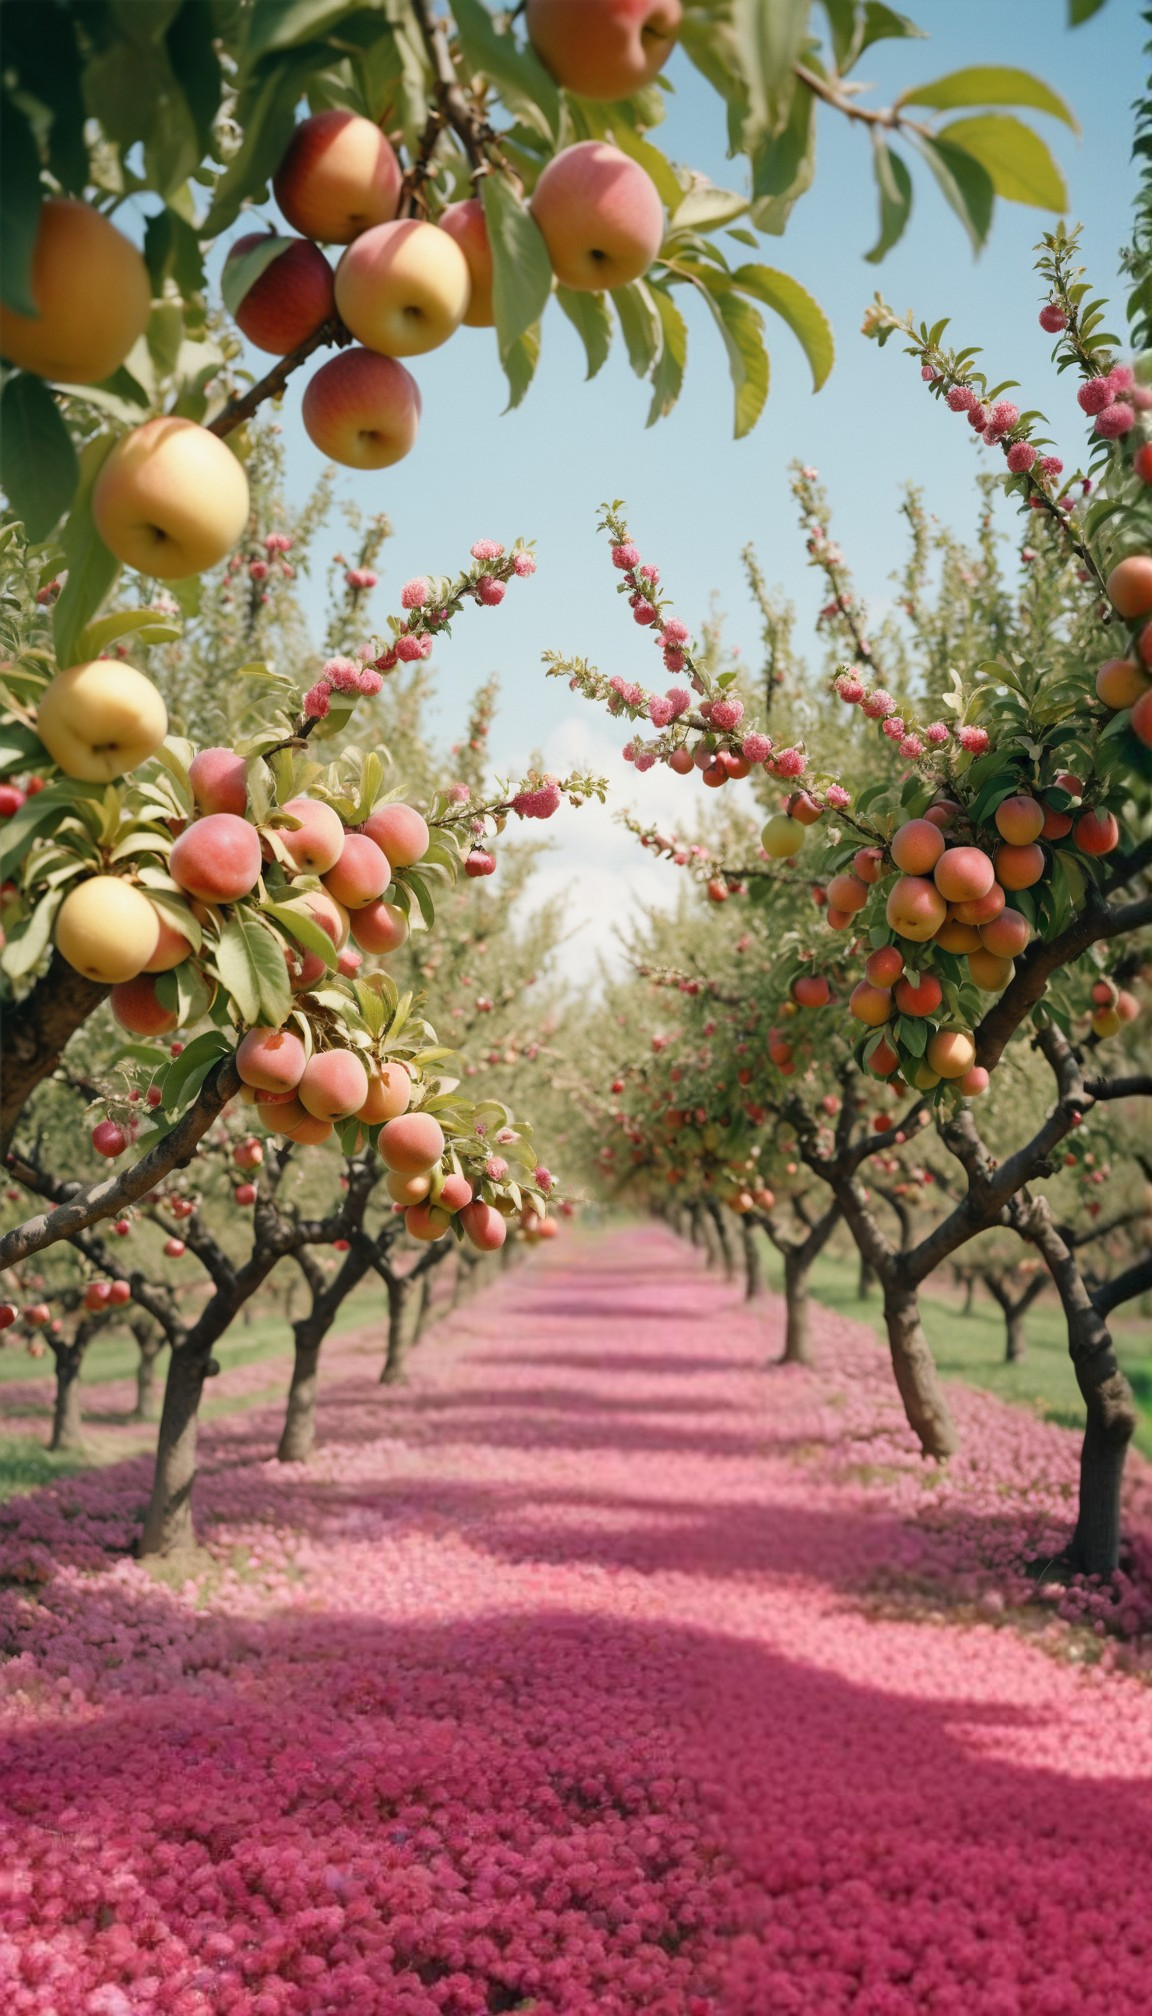 pikaso_texttoimage_35mm-film-photography-Photo-of-an-orchard-full-of-.png